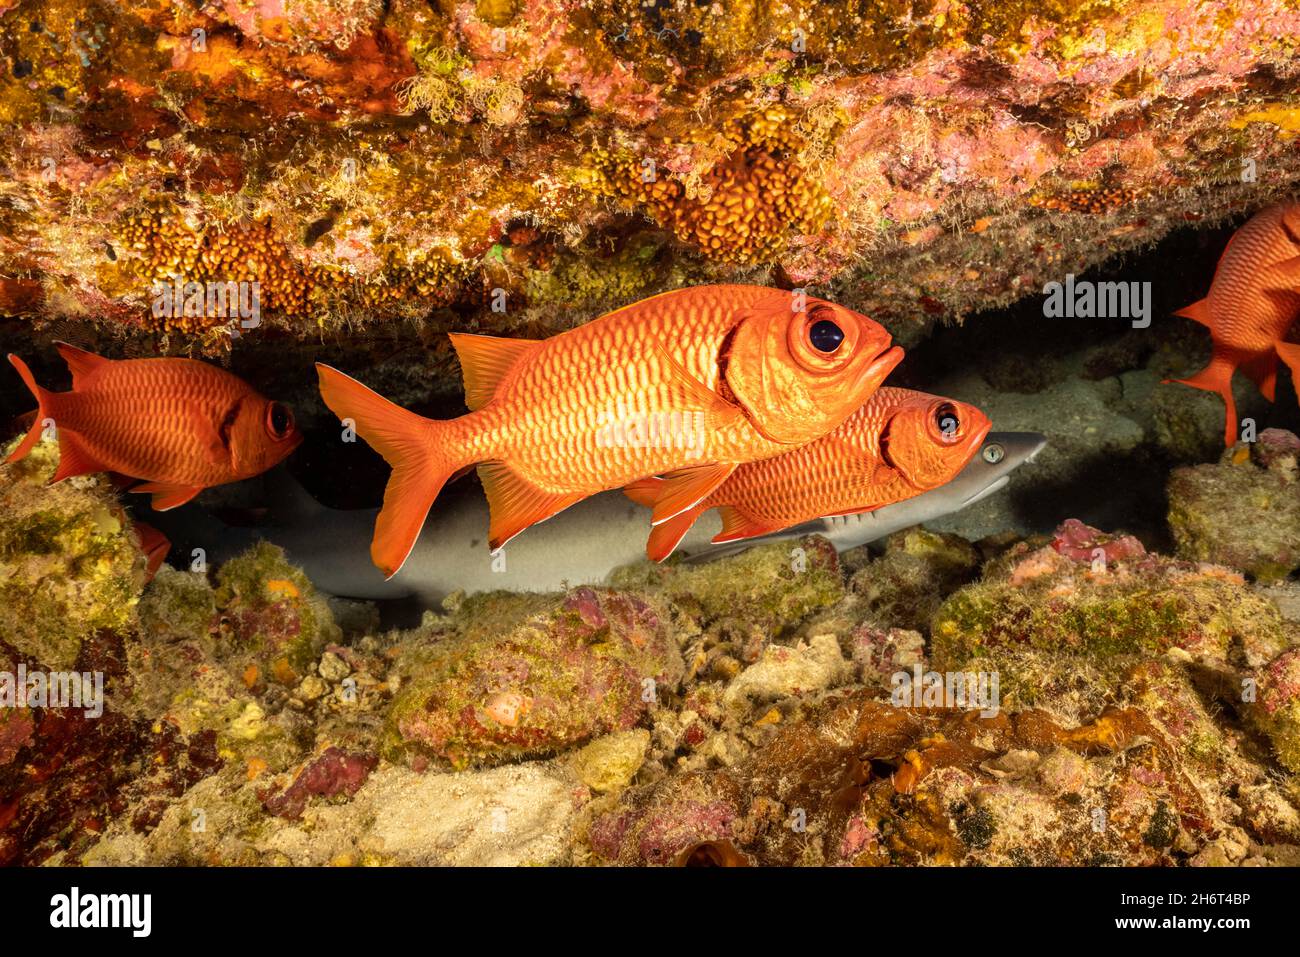 During the day these shoulderbar soldierfish, Myripristis kuntee, share this crevice with a whitetip reef shark, Triaenodon obesus, Hawaii. At night t Stock Photo